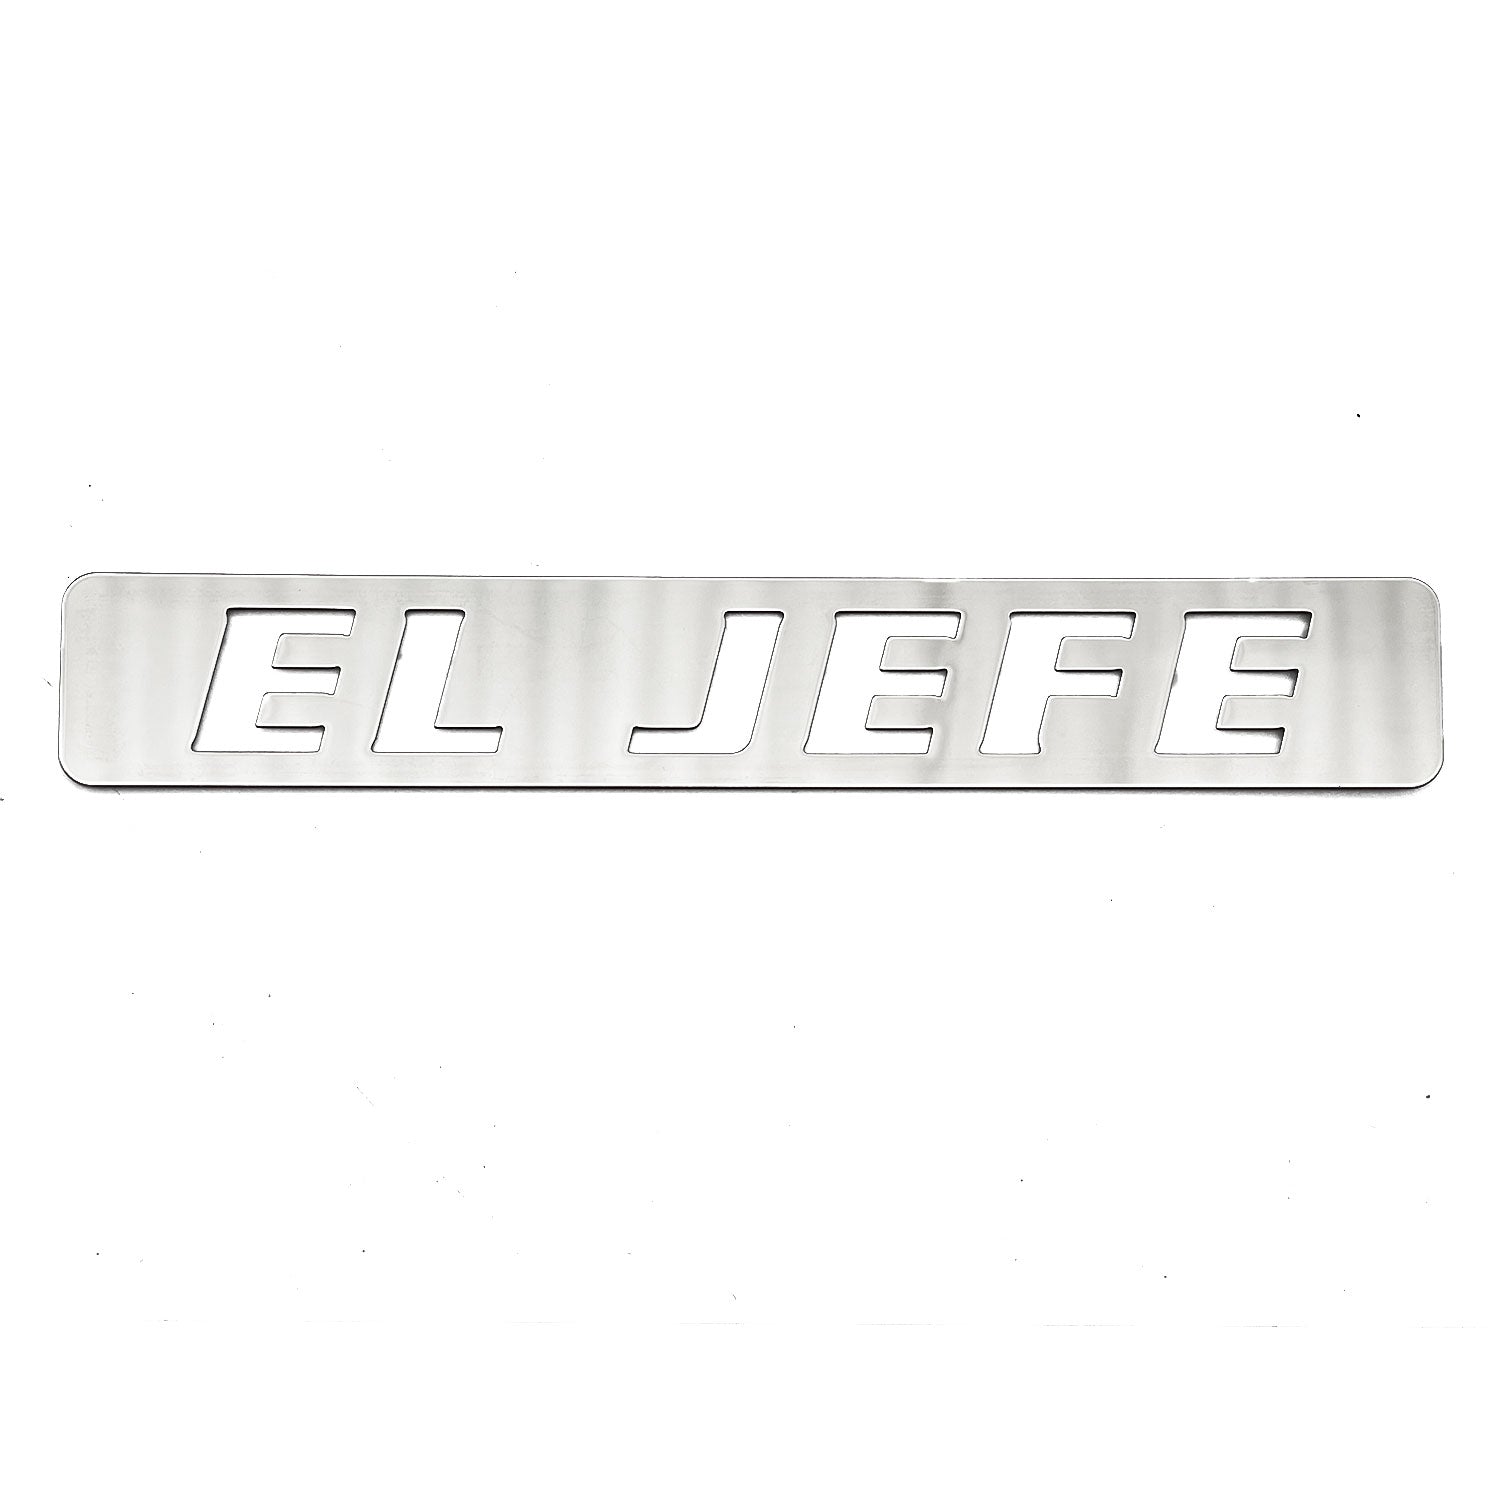 El Jefe "The Boss" Emblem Badge Decal Sticker 3D Cutout Stainless Steel Dual Layer